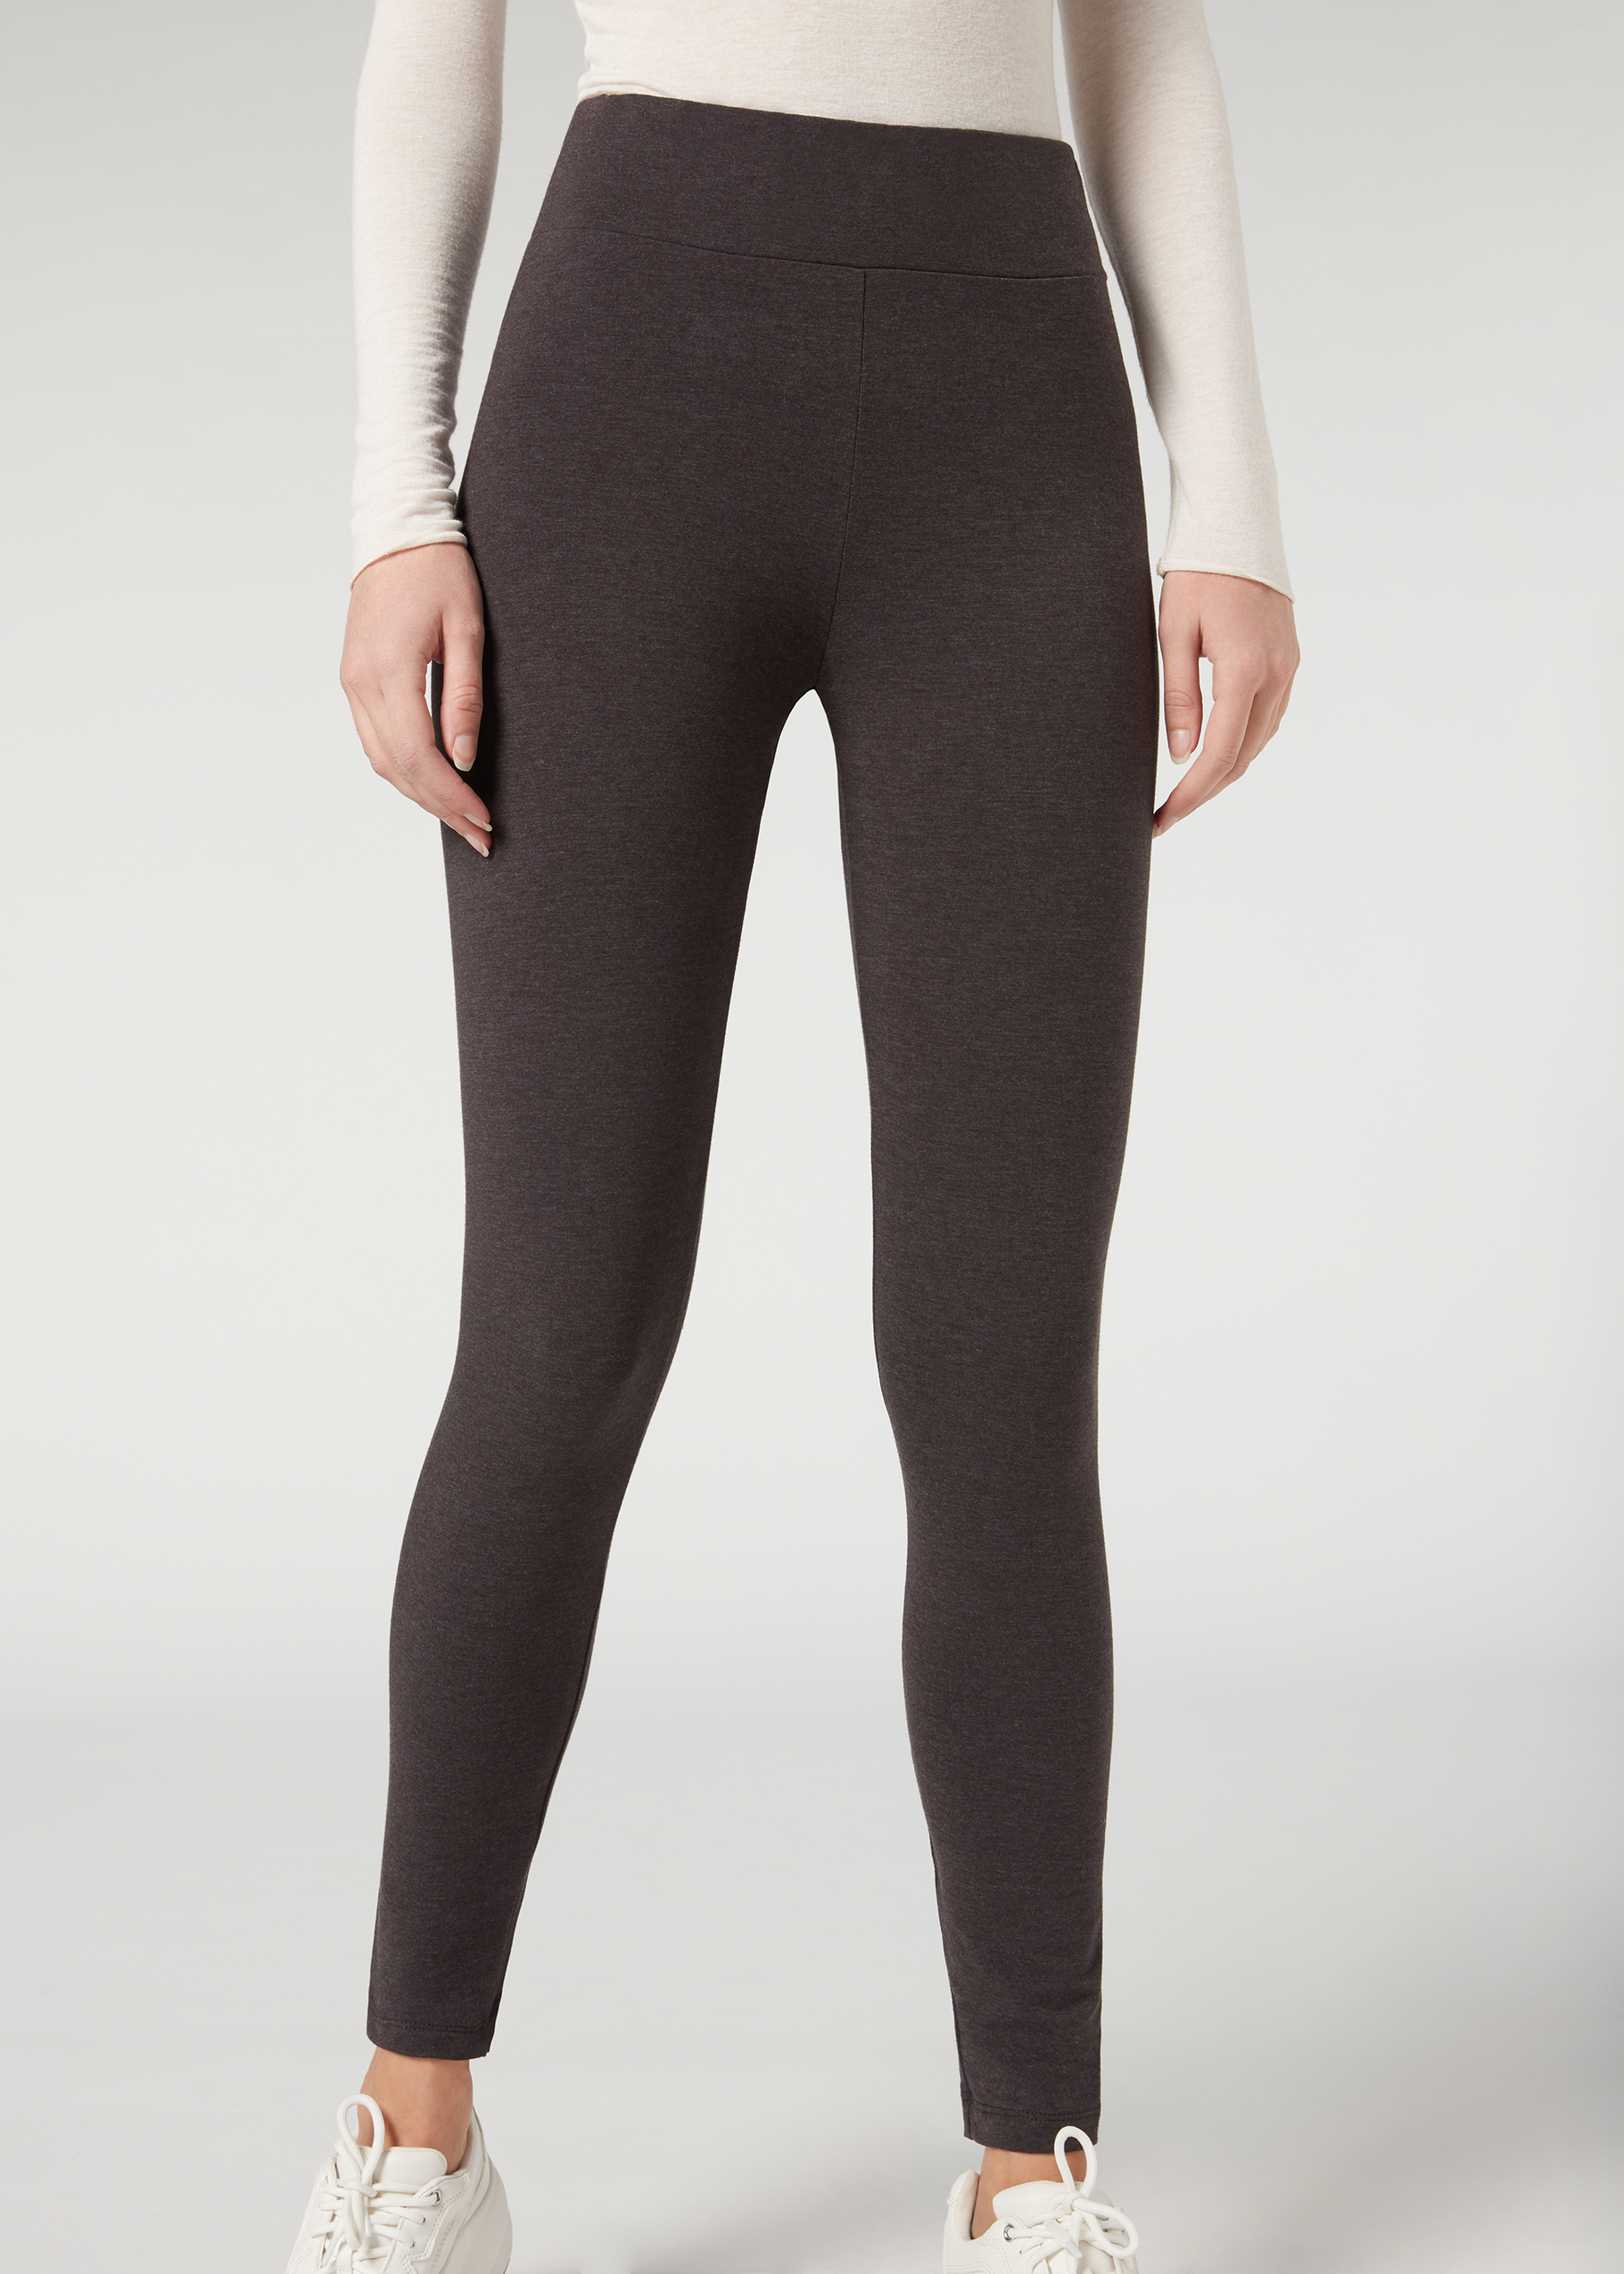 Leggings Ecopelle Calzedonia Opinionistic  International Society of  Precision Agriculture